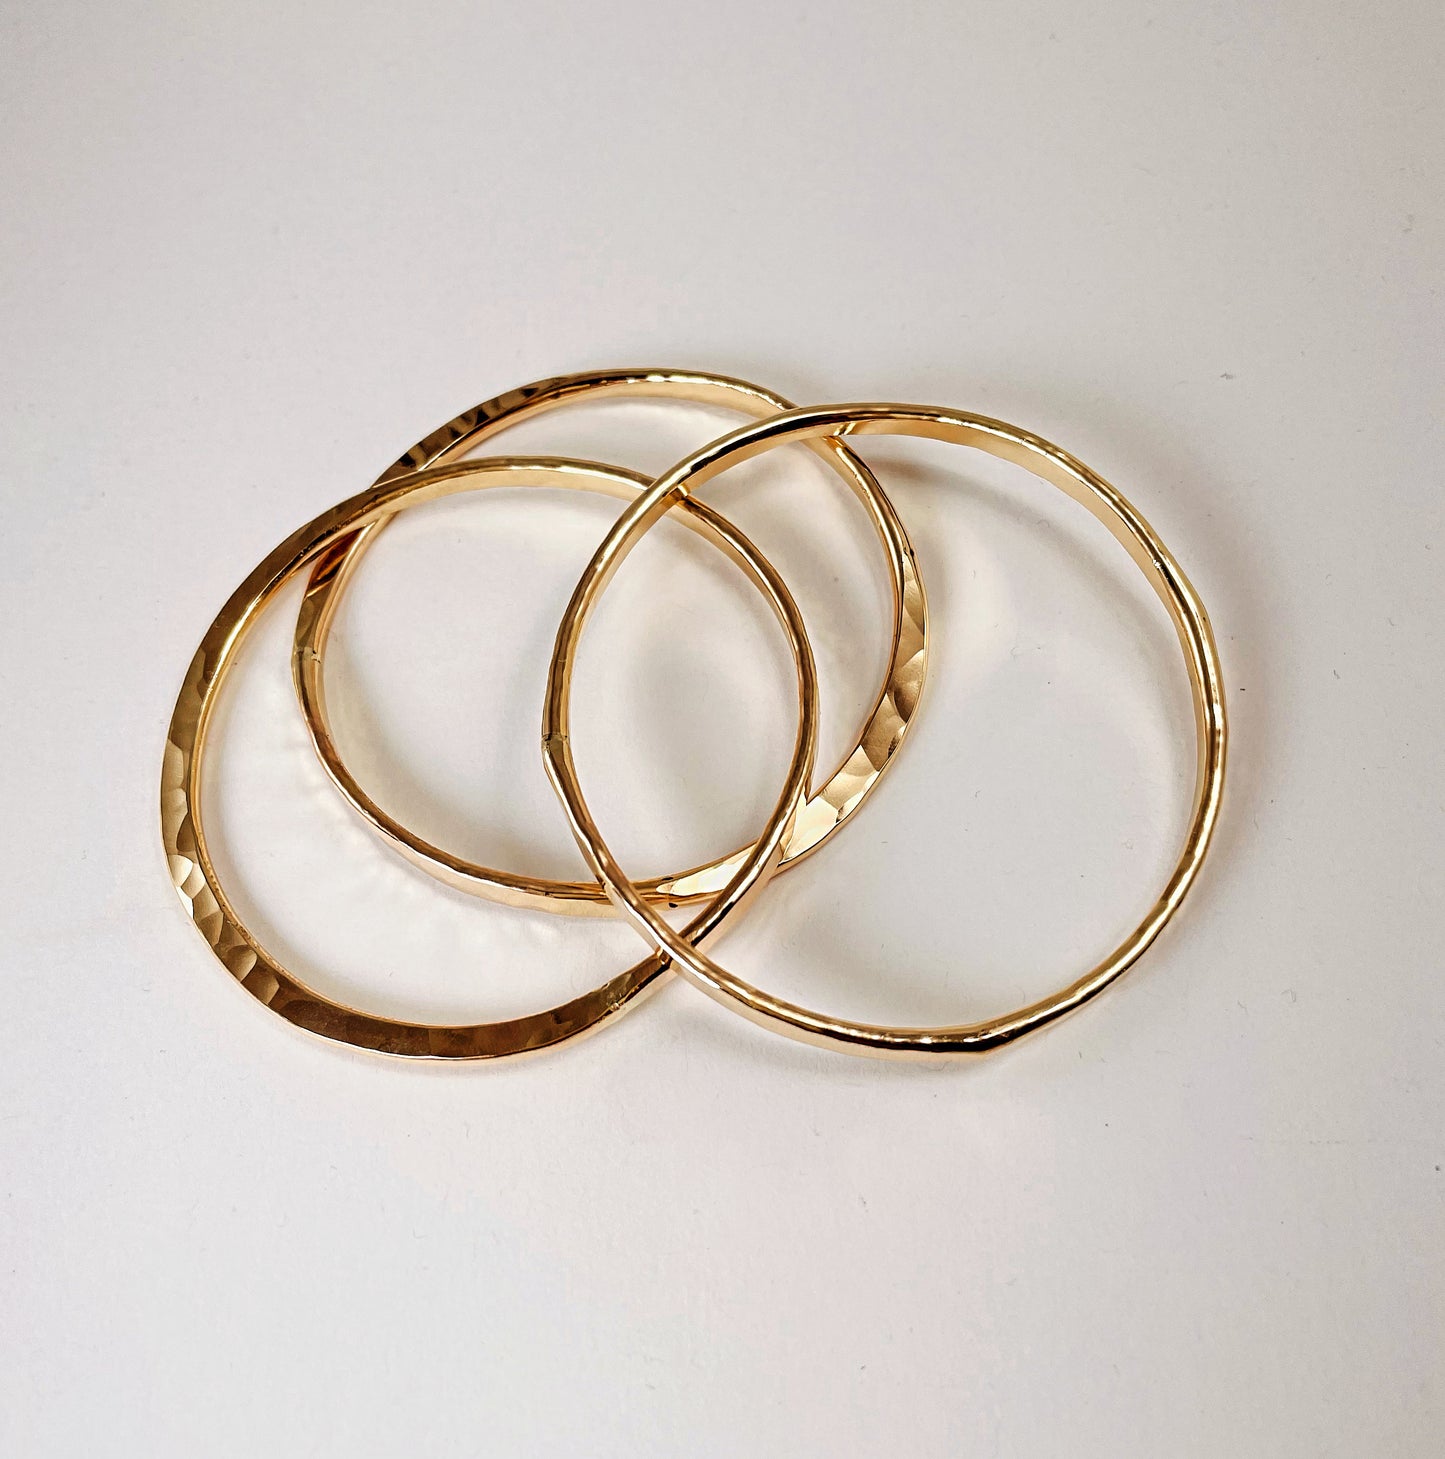 14K gold filled hand forged round bangle